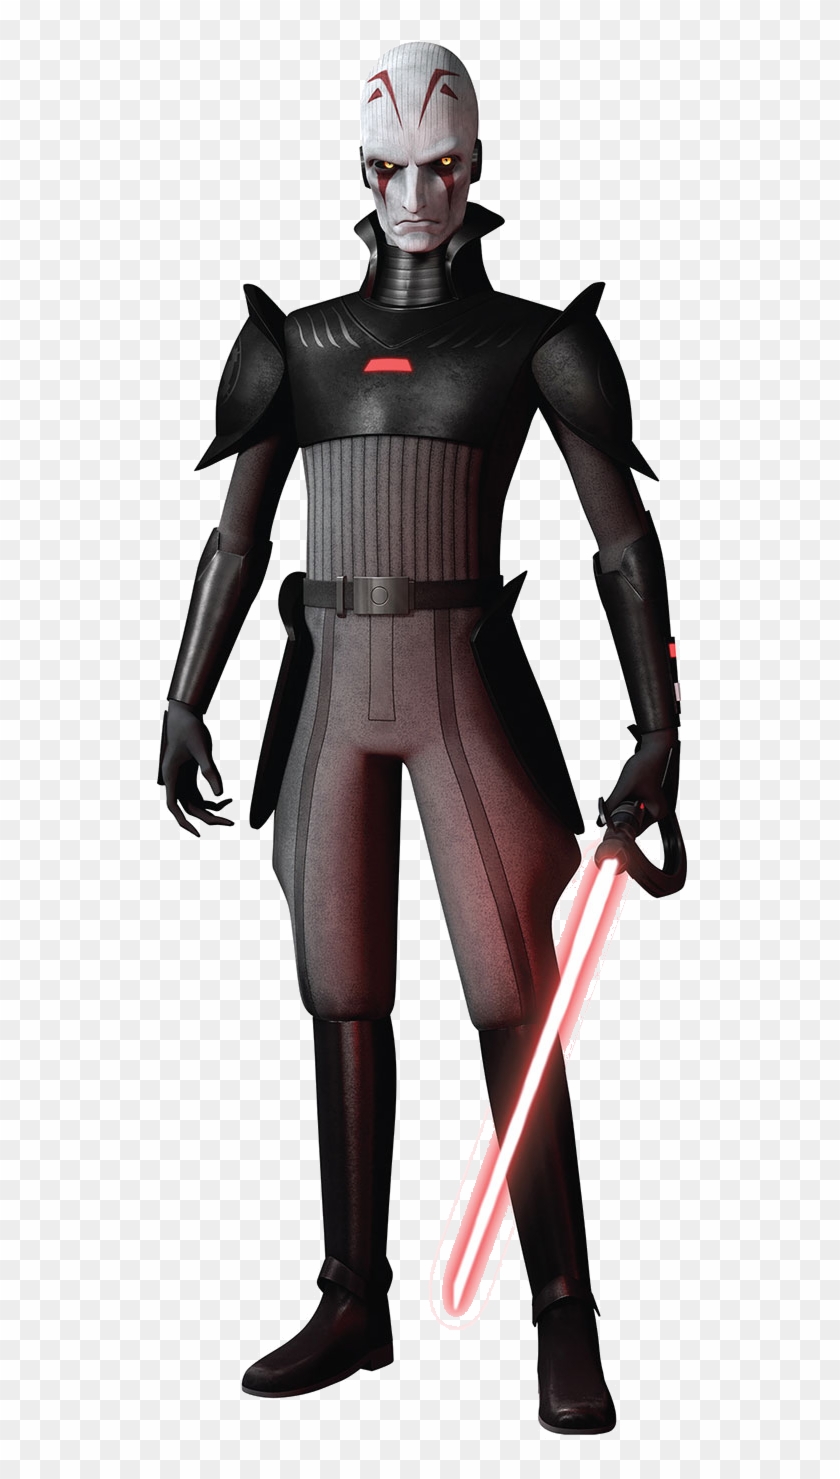 Png Star Wars Rebels - Inquisitor Star Wars Clipart